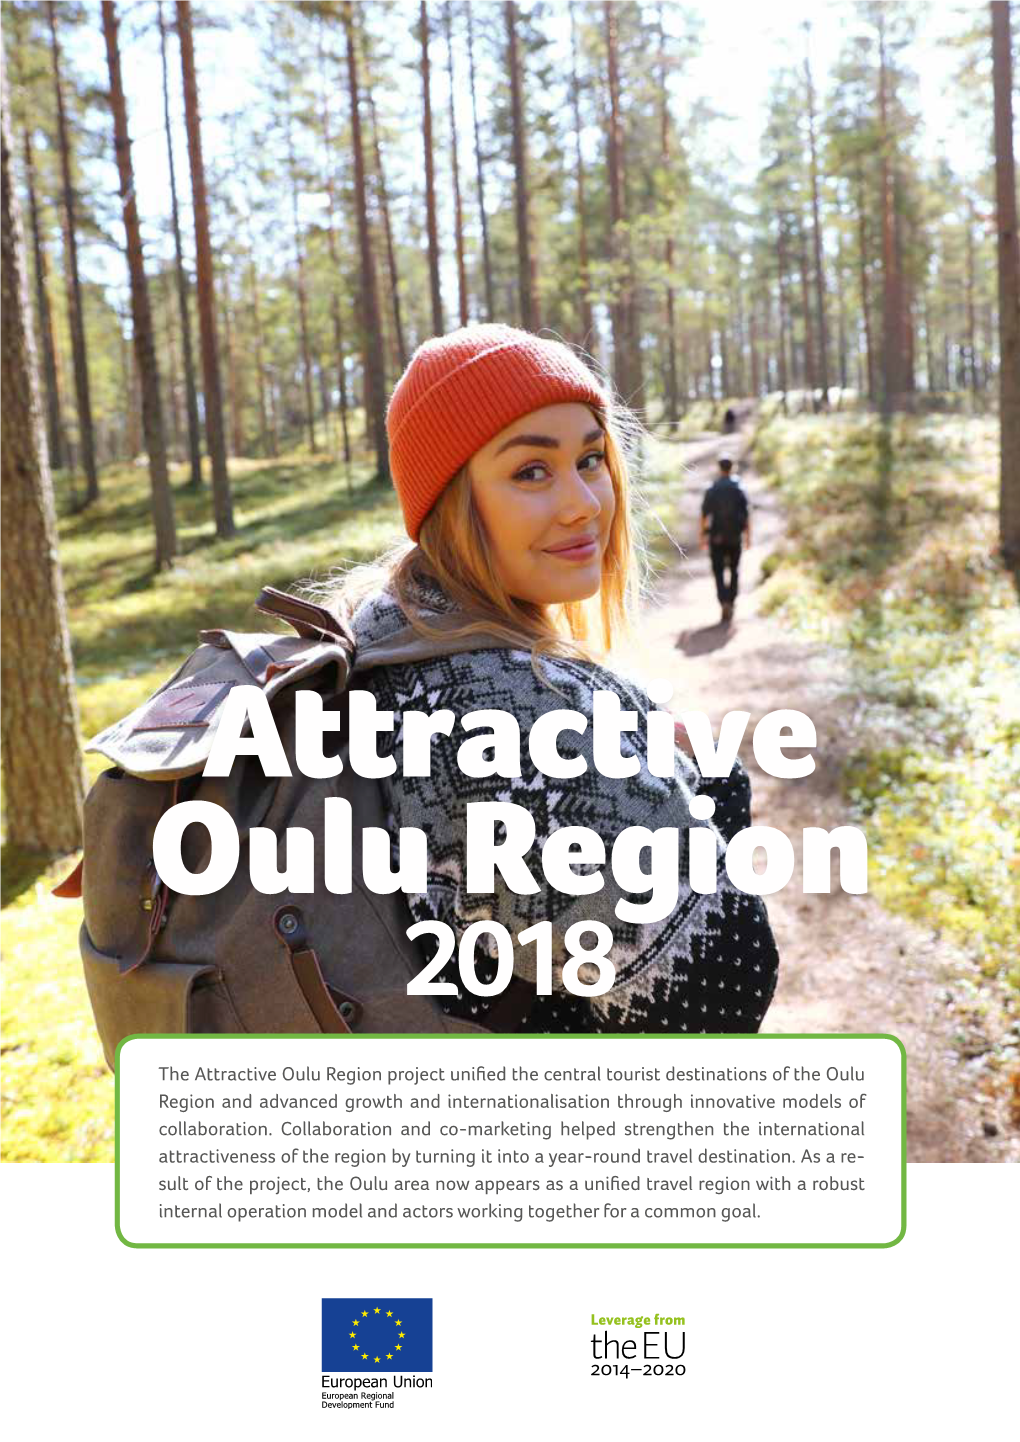 The Attractive Oulu Region Project Unified the Central Tourist